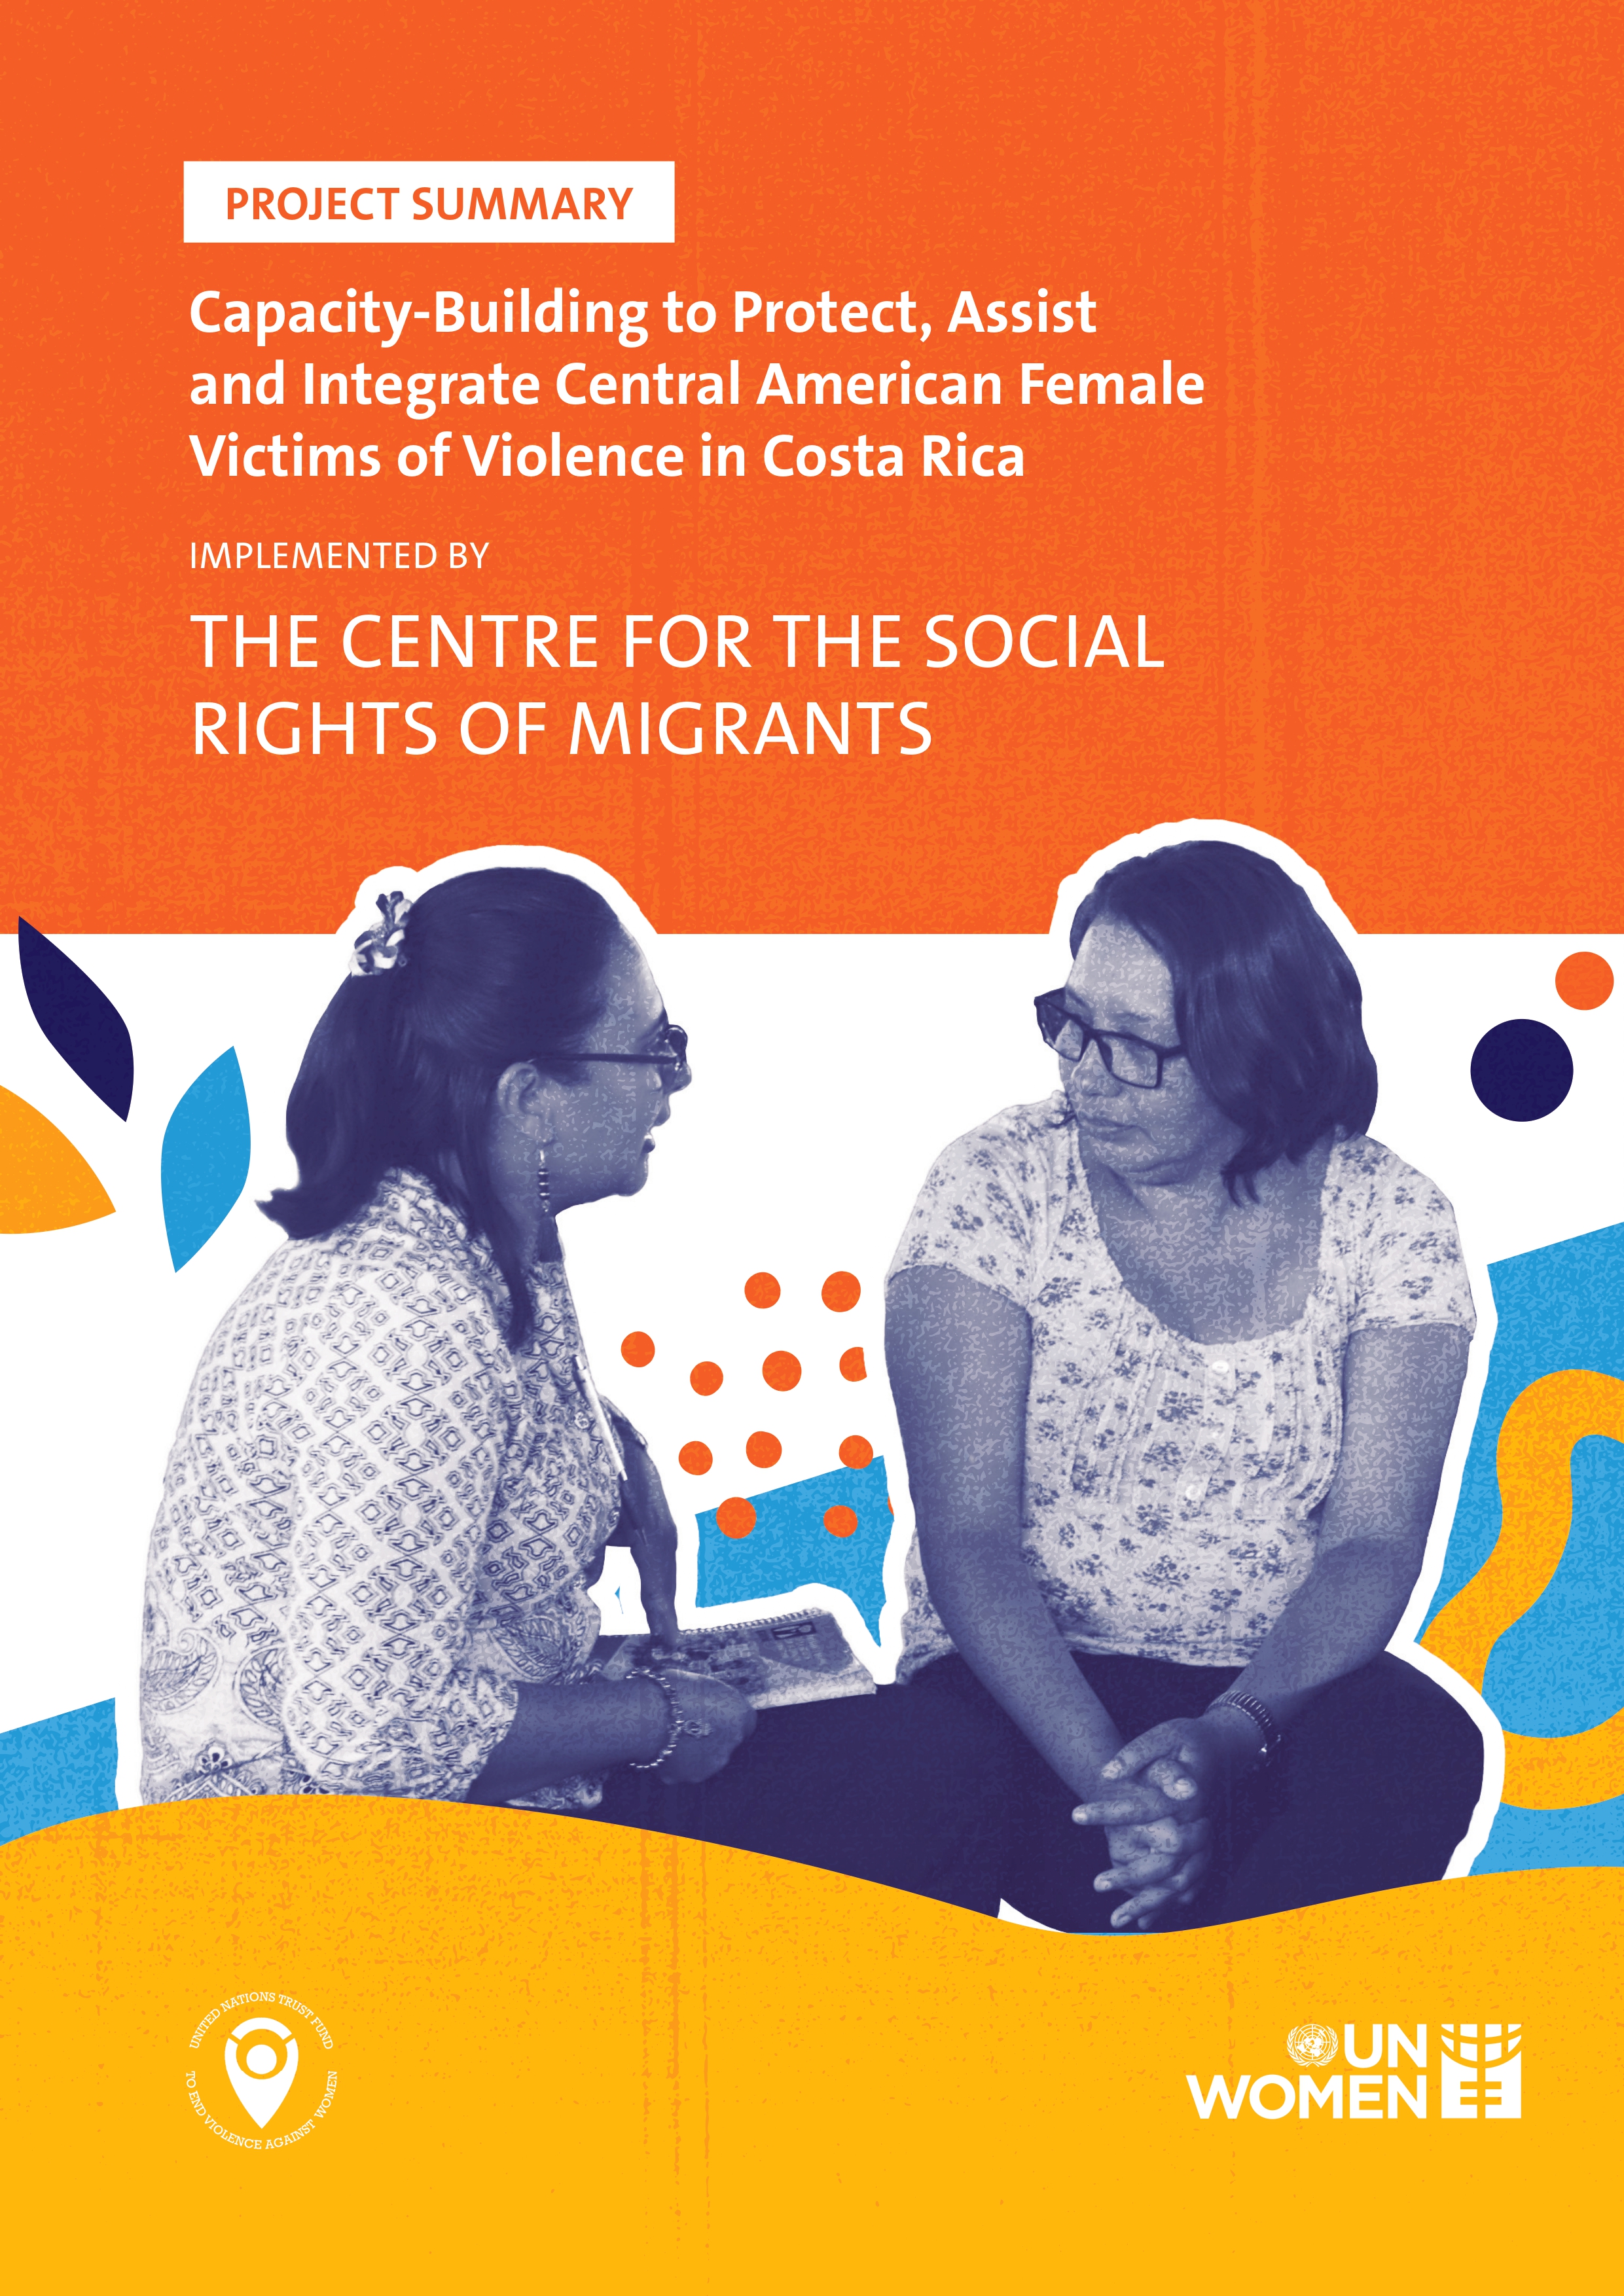 Project Summary of “Capacity-Building to Protect, Assist and Integrate Central American Female Victims of Violence in Costa Rica” by the Centre for the Social Rights of Migrants 